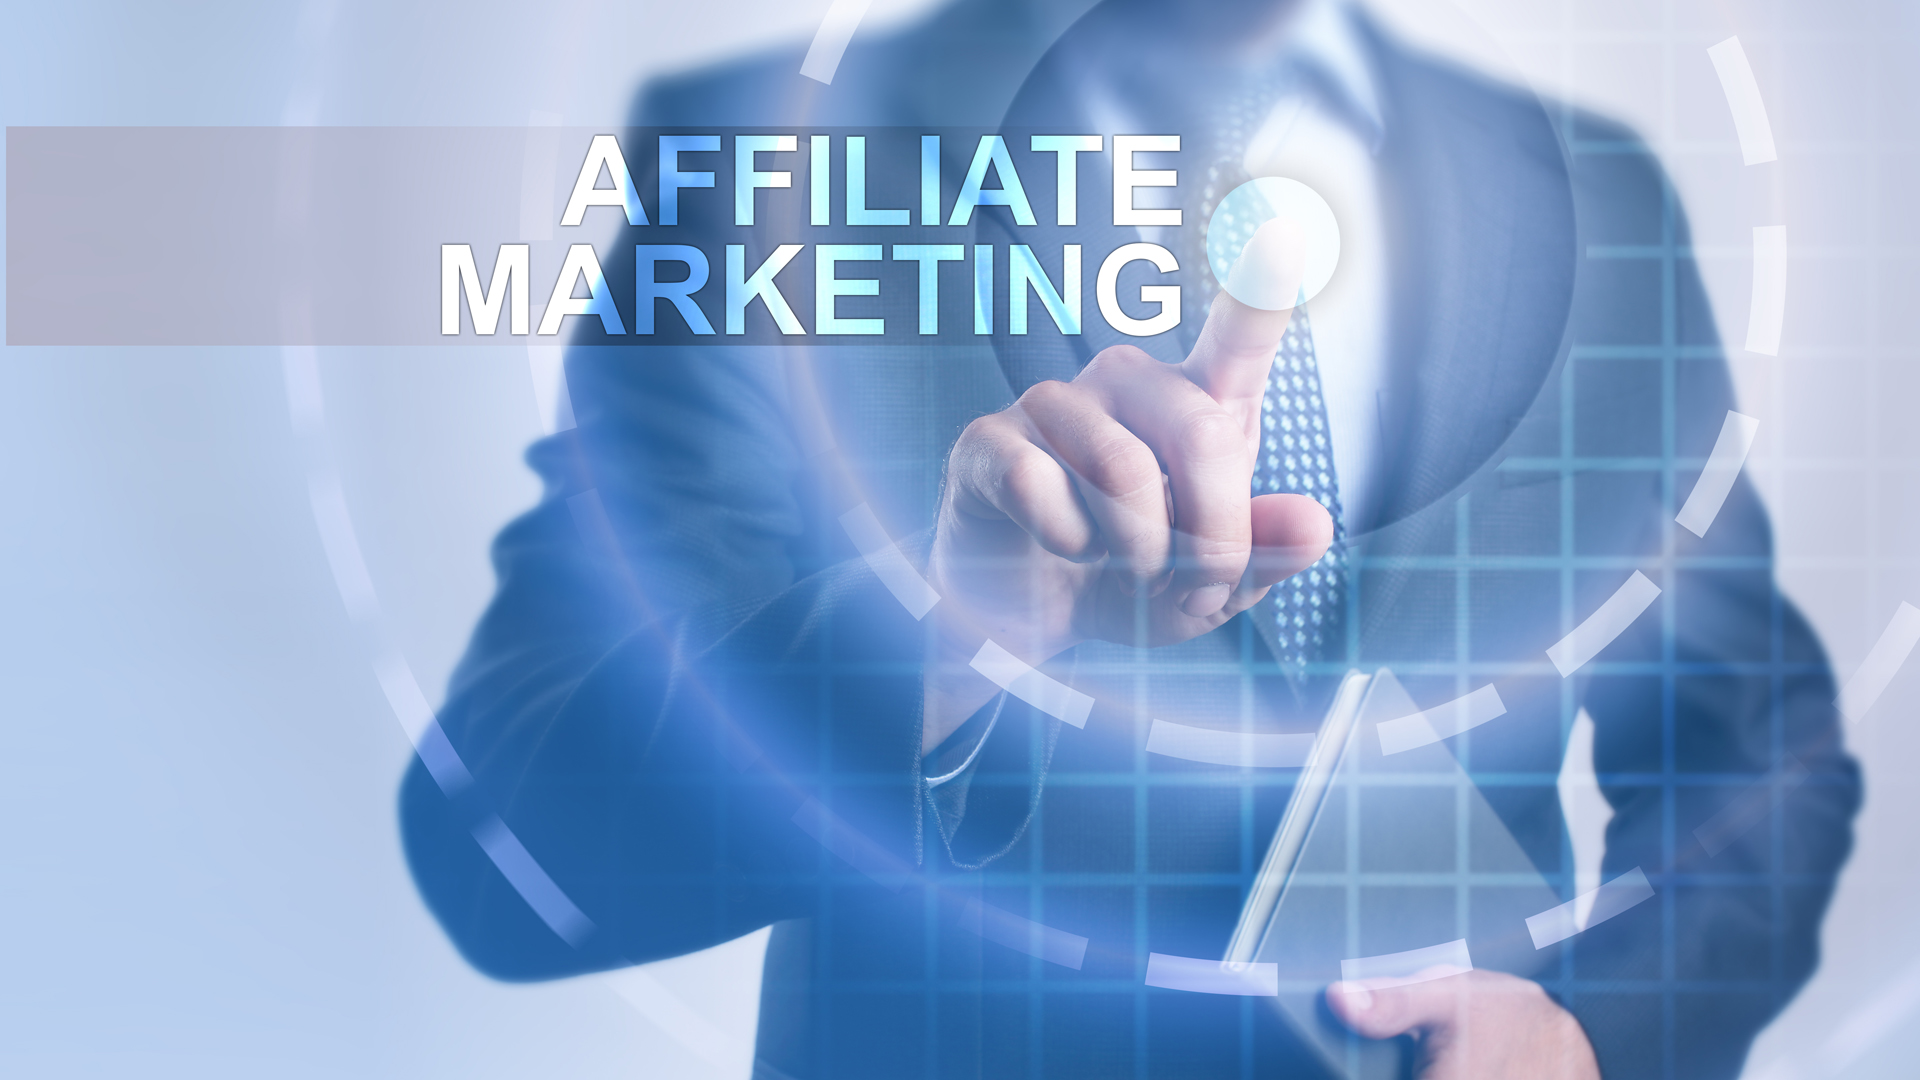 5 steps to leverage the power of affiliates in your email marketing